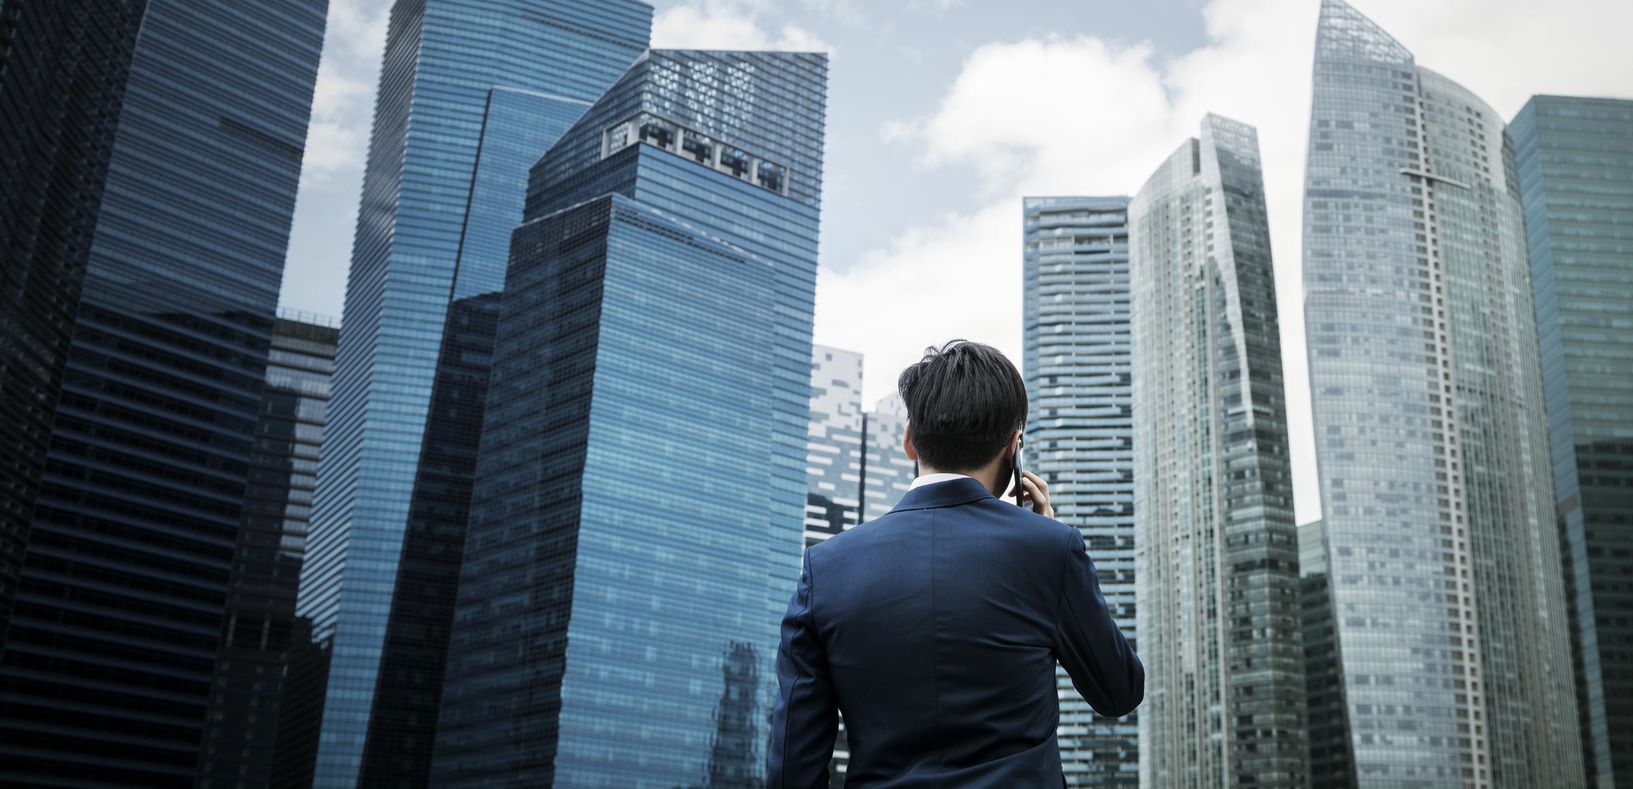 man on cell phone with city skyline in background